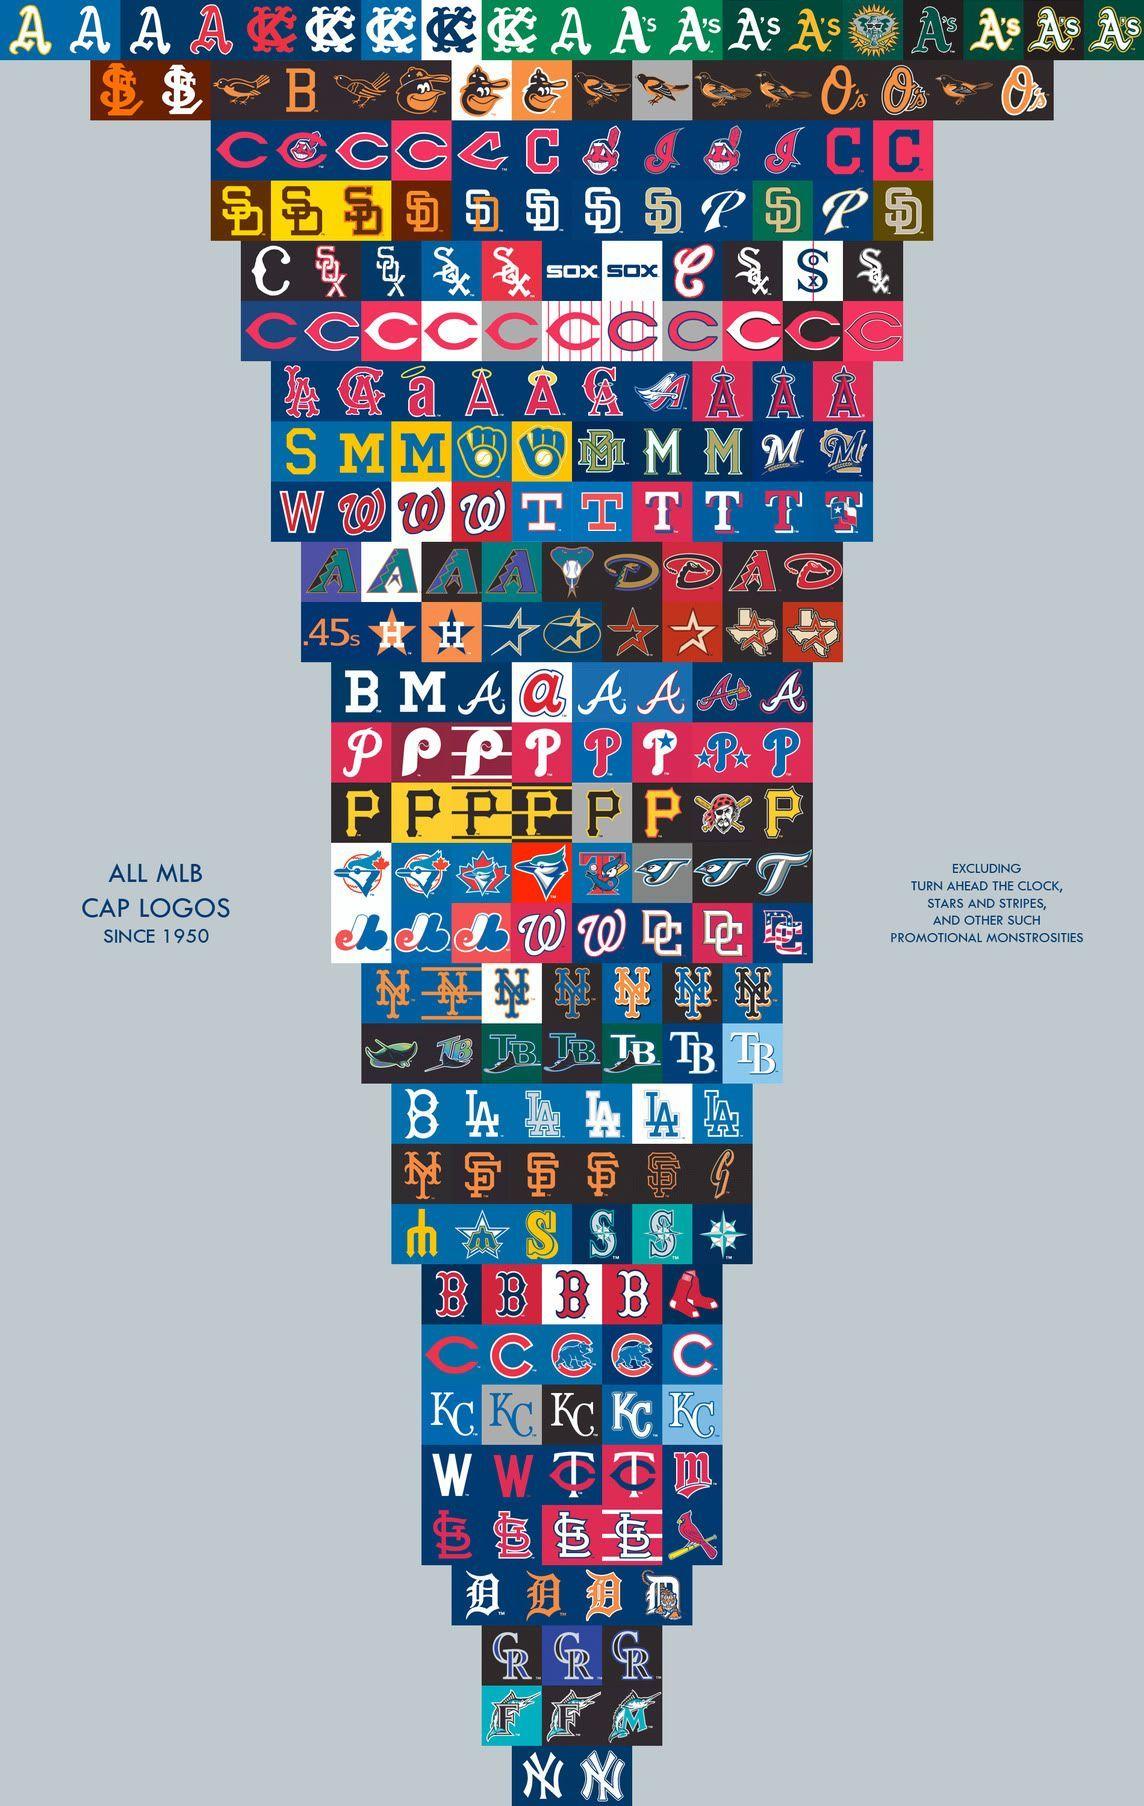 All MLB Logo - All the different permutations of every MLB logo over the years ...